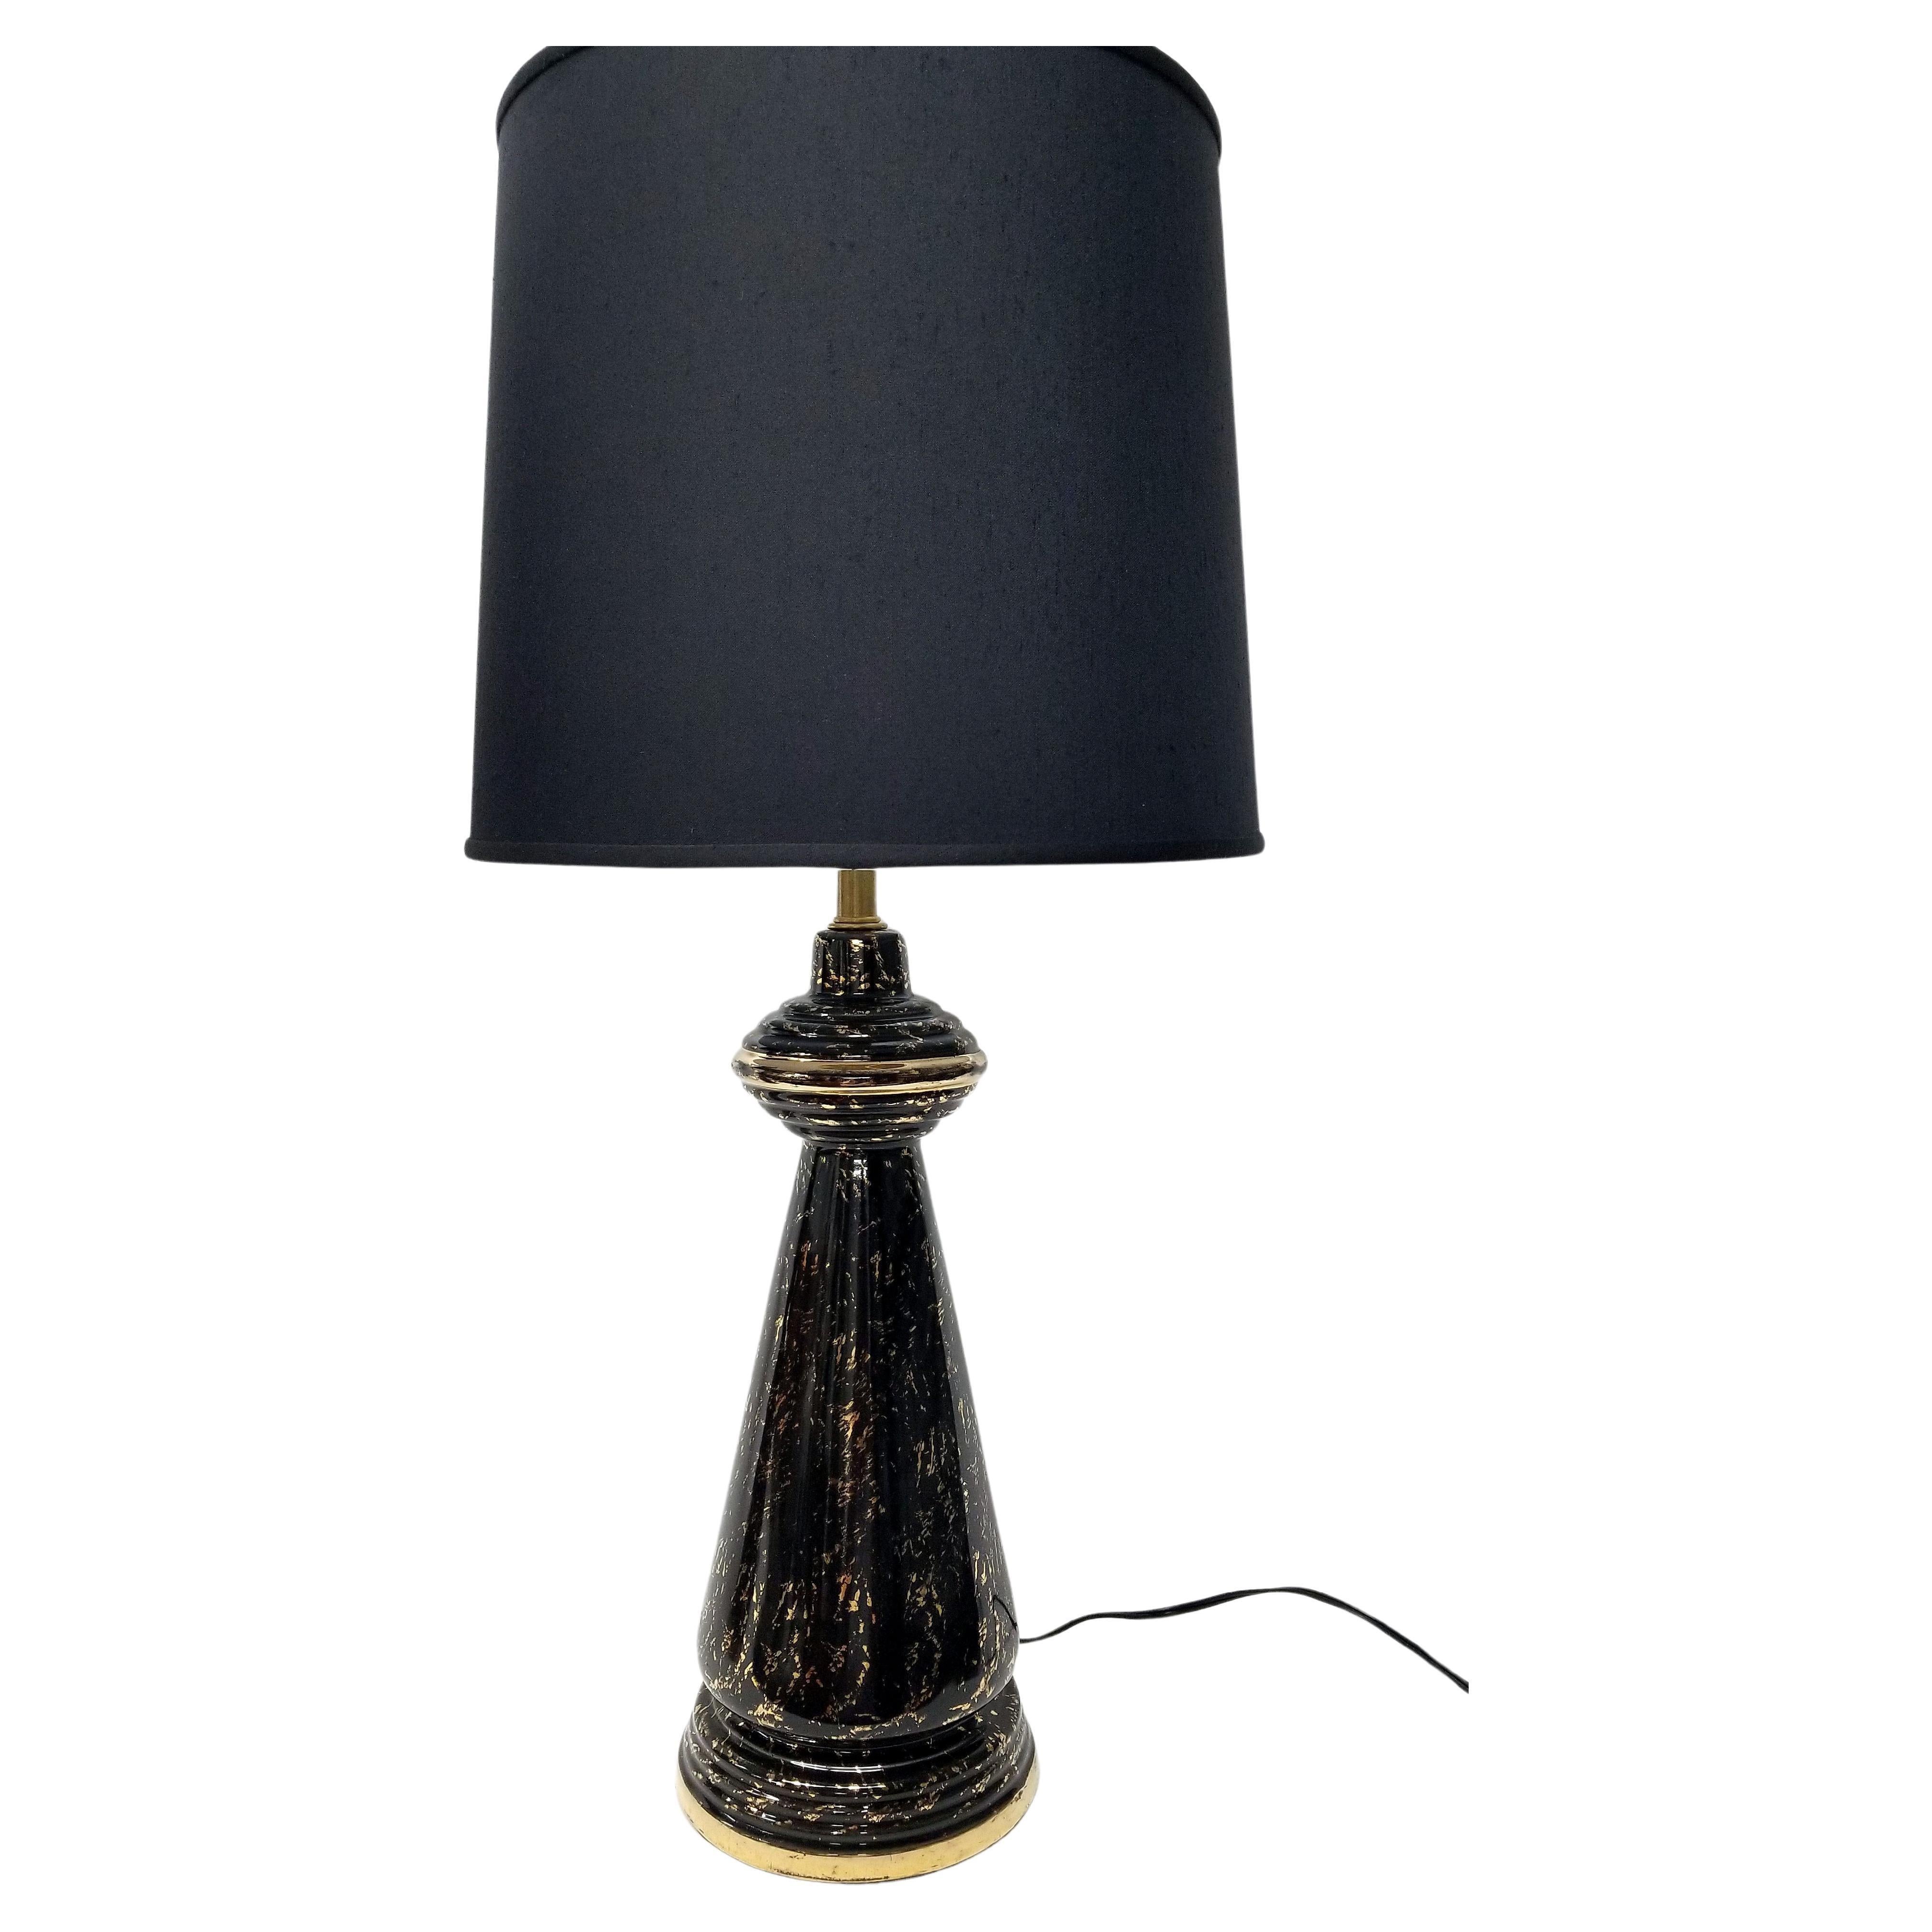 Art Deco Black and Gold Table Lamps with New Custom Shades - a Pair For Sale 3